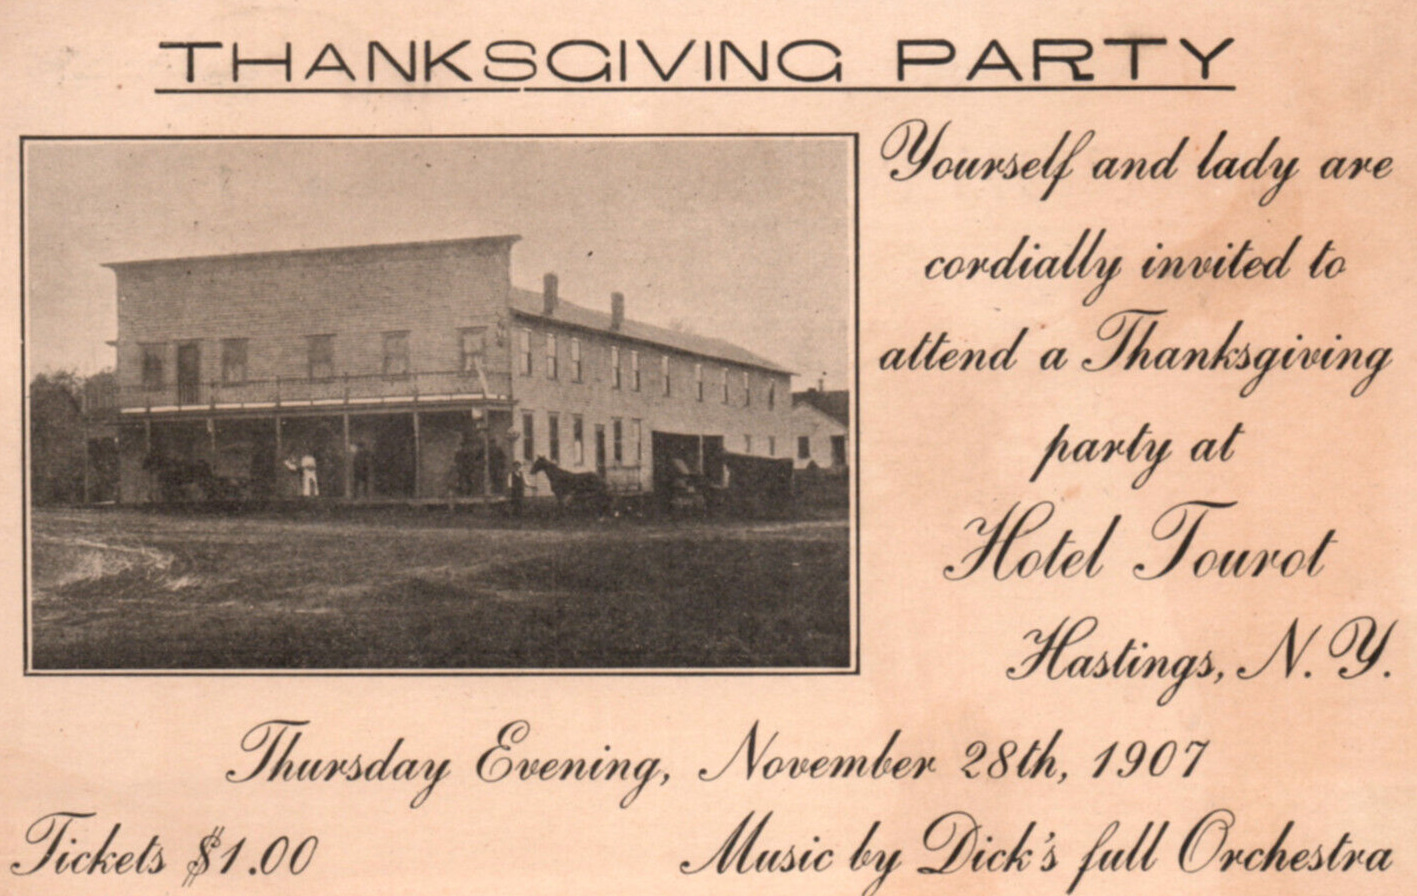 Hastings New York Hotel Tourot Party Orchestra Thanksgiving Postcard 1907